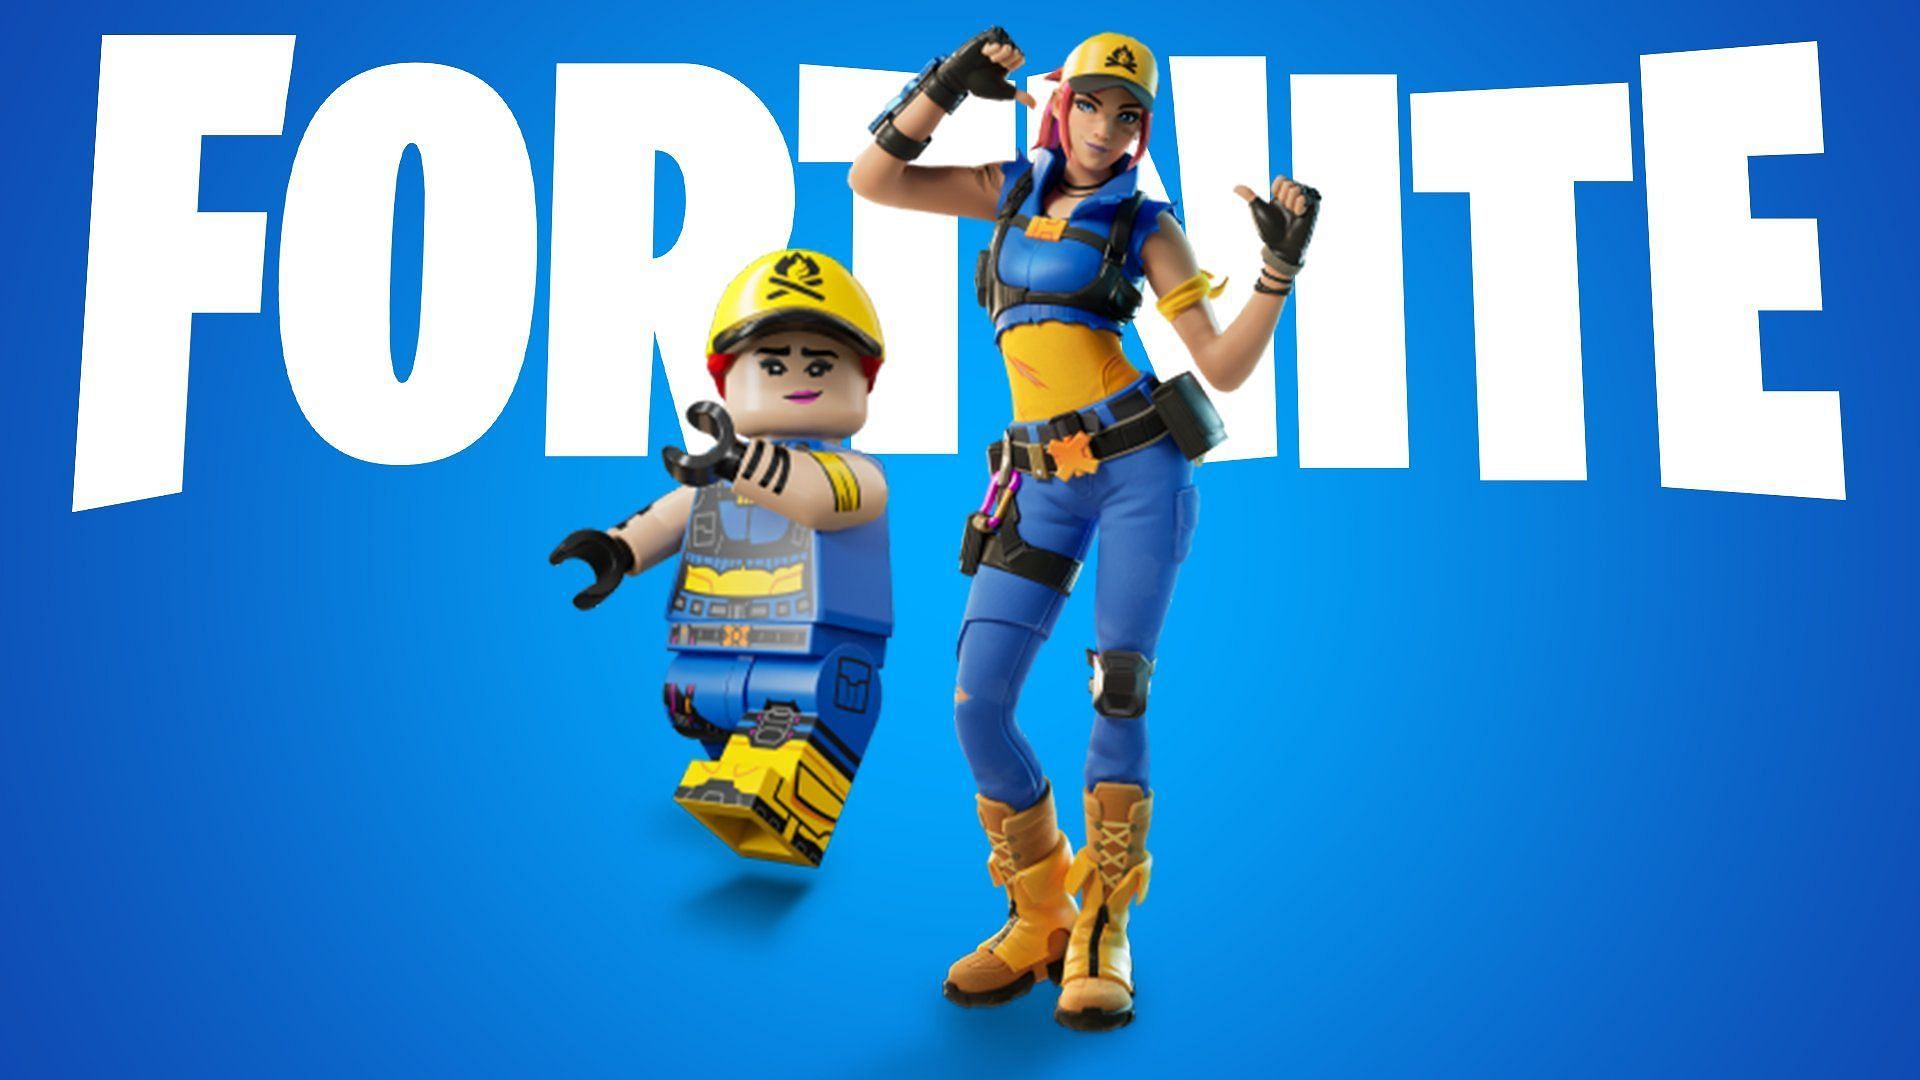 How to get the Fortnite x LEGO Explorer Emile skin for free